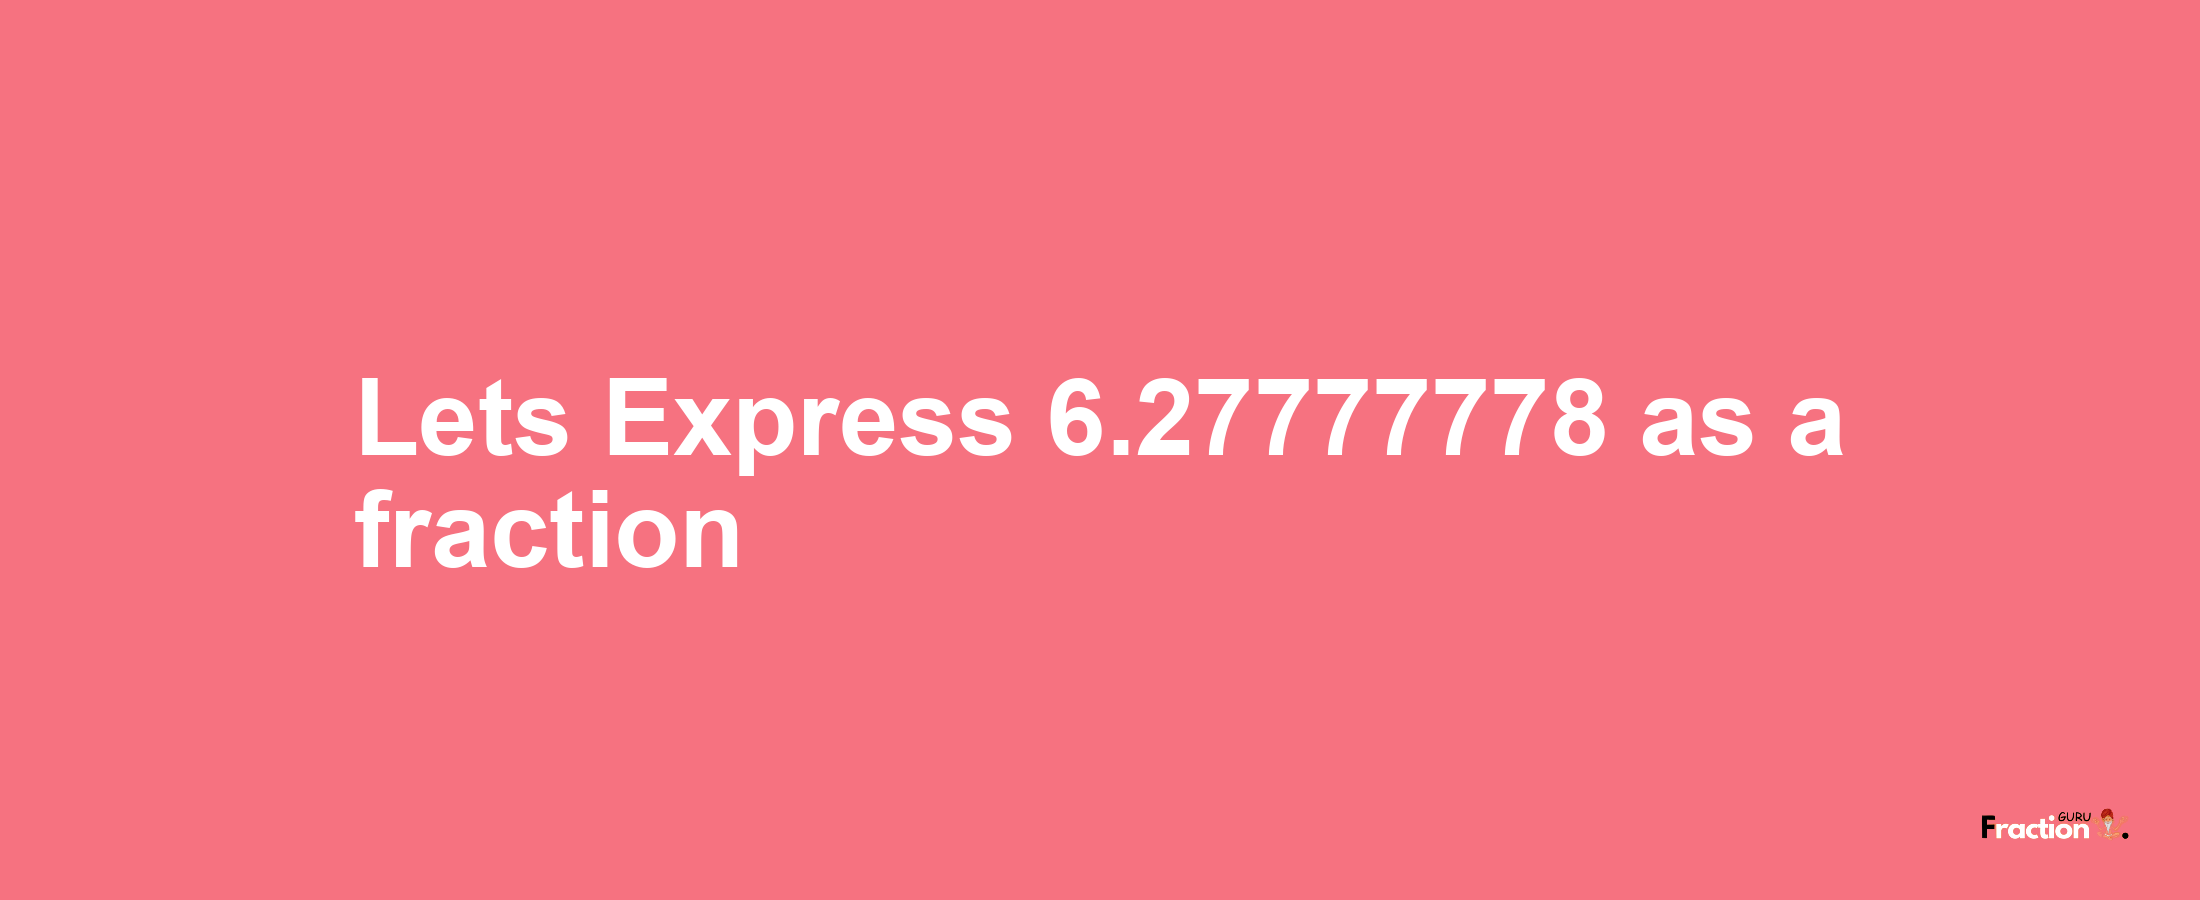 Lets Express 6.27777778 as afraction